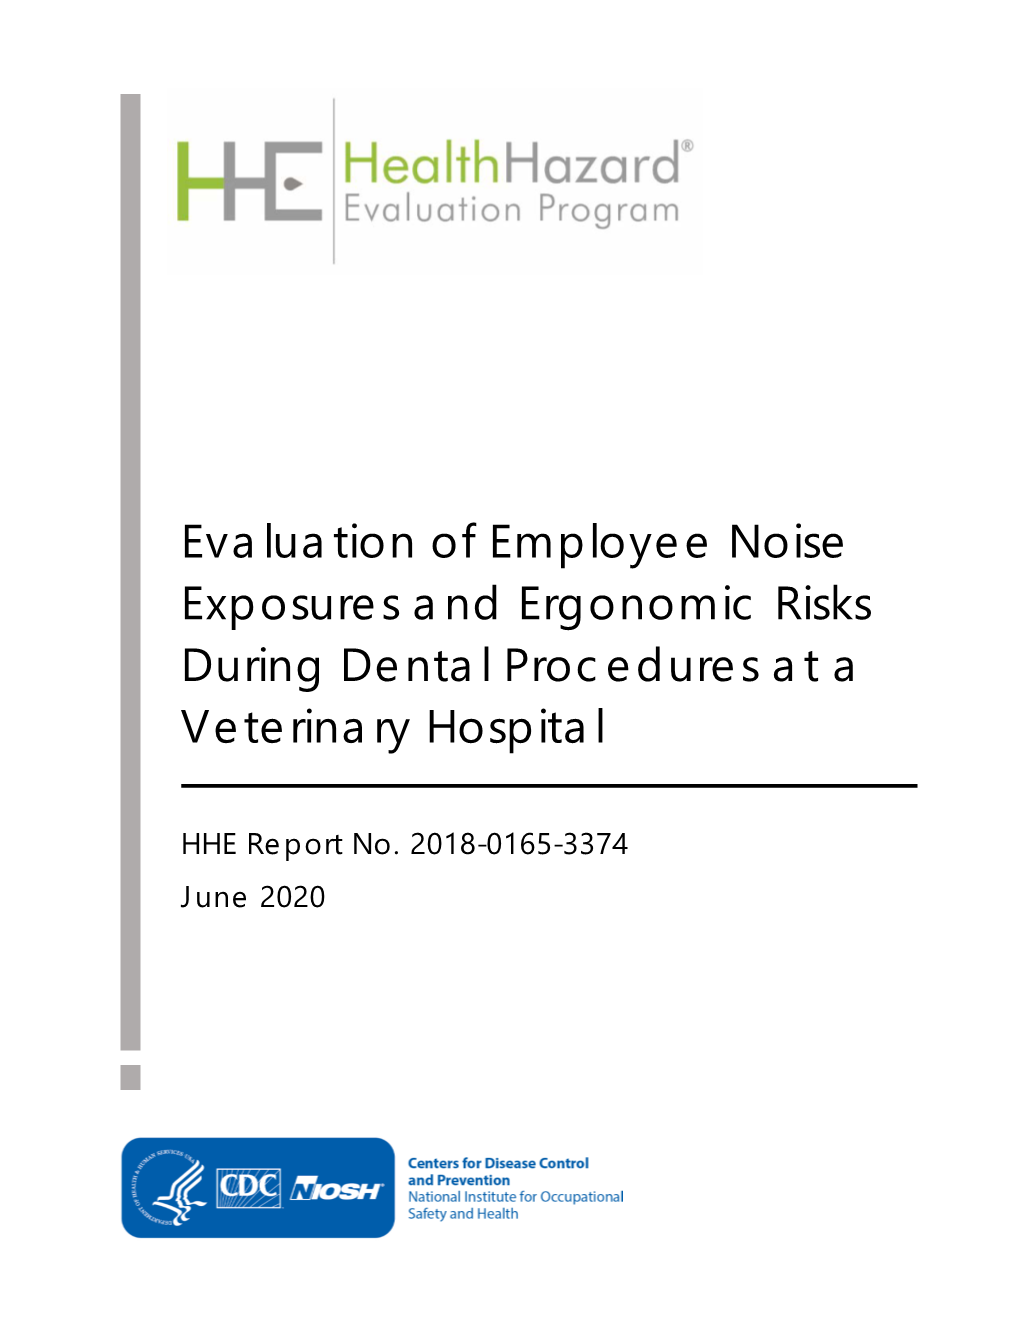 Noise Exposures and Ergonomic Risks During Dental Procedures at a Veterinary Hospital